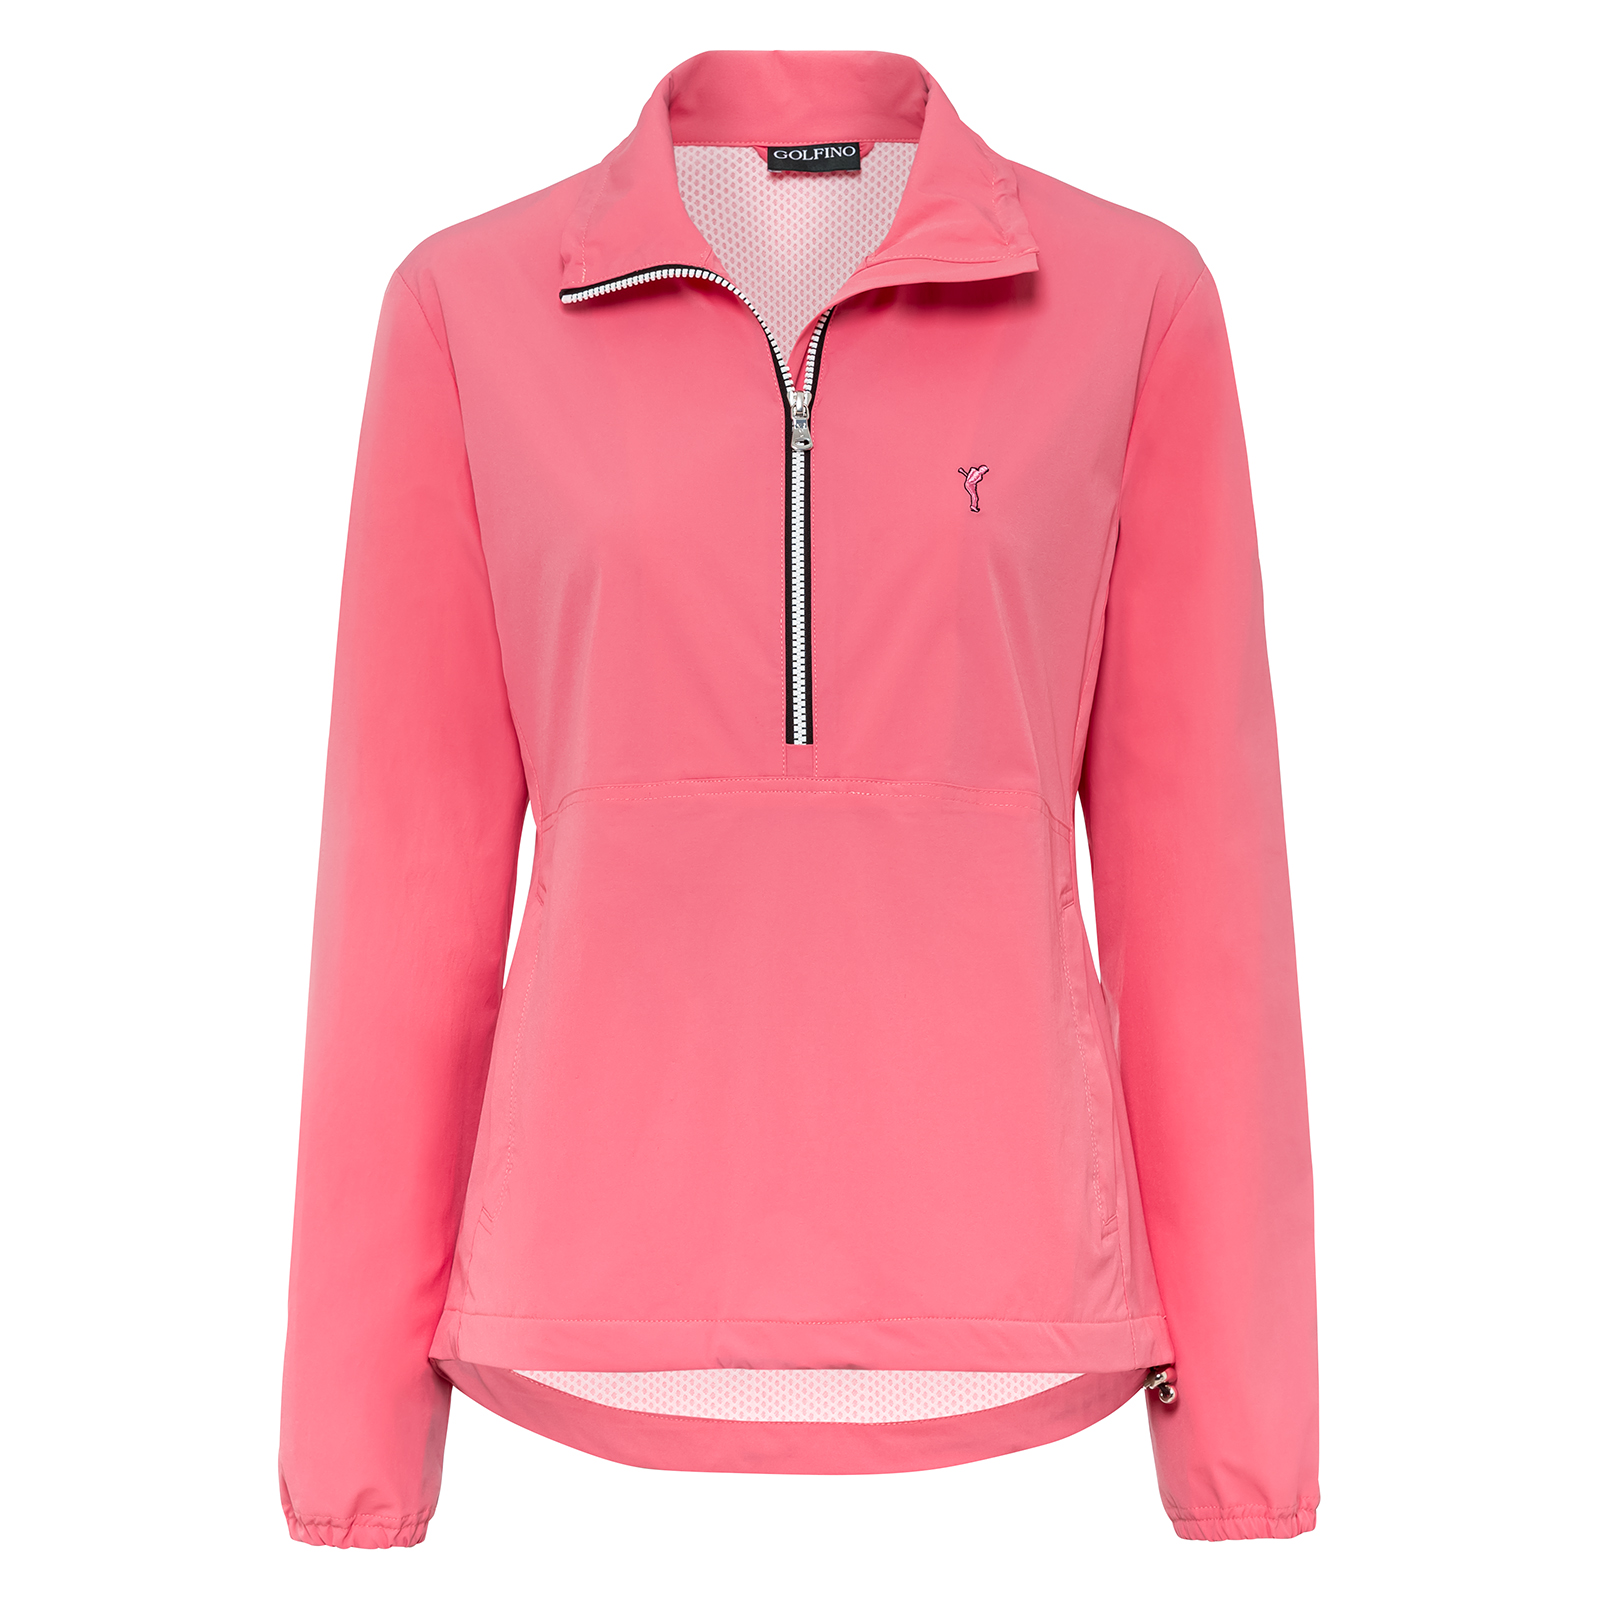 Ladies' water-repellent, slip-on golf windcheater jacket with stretch component